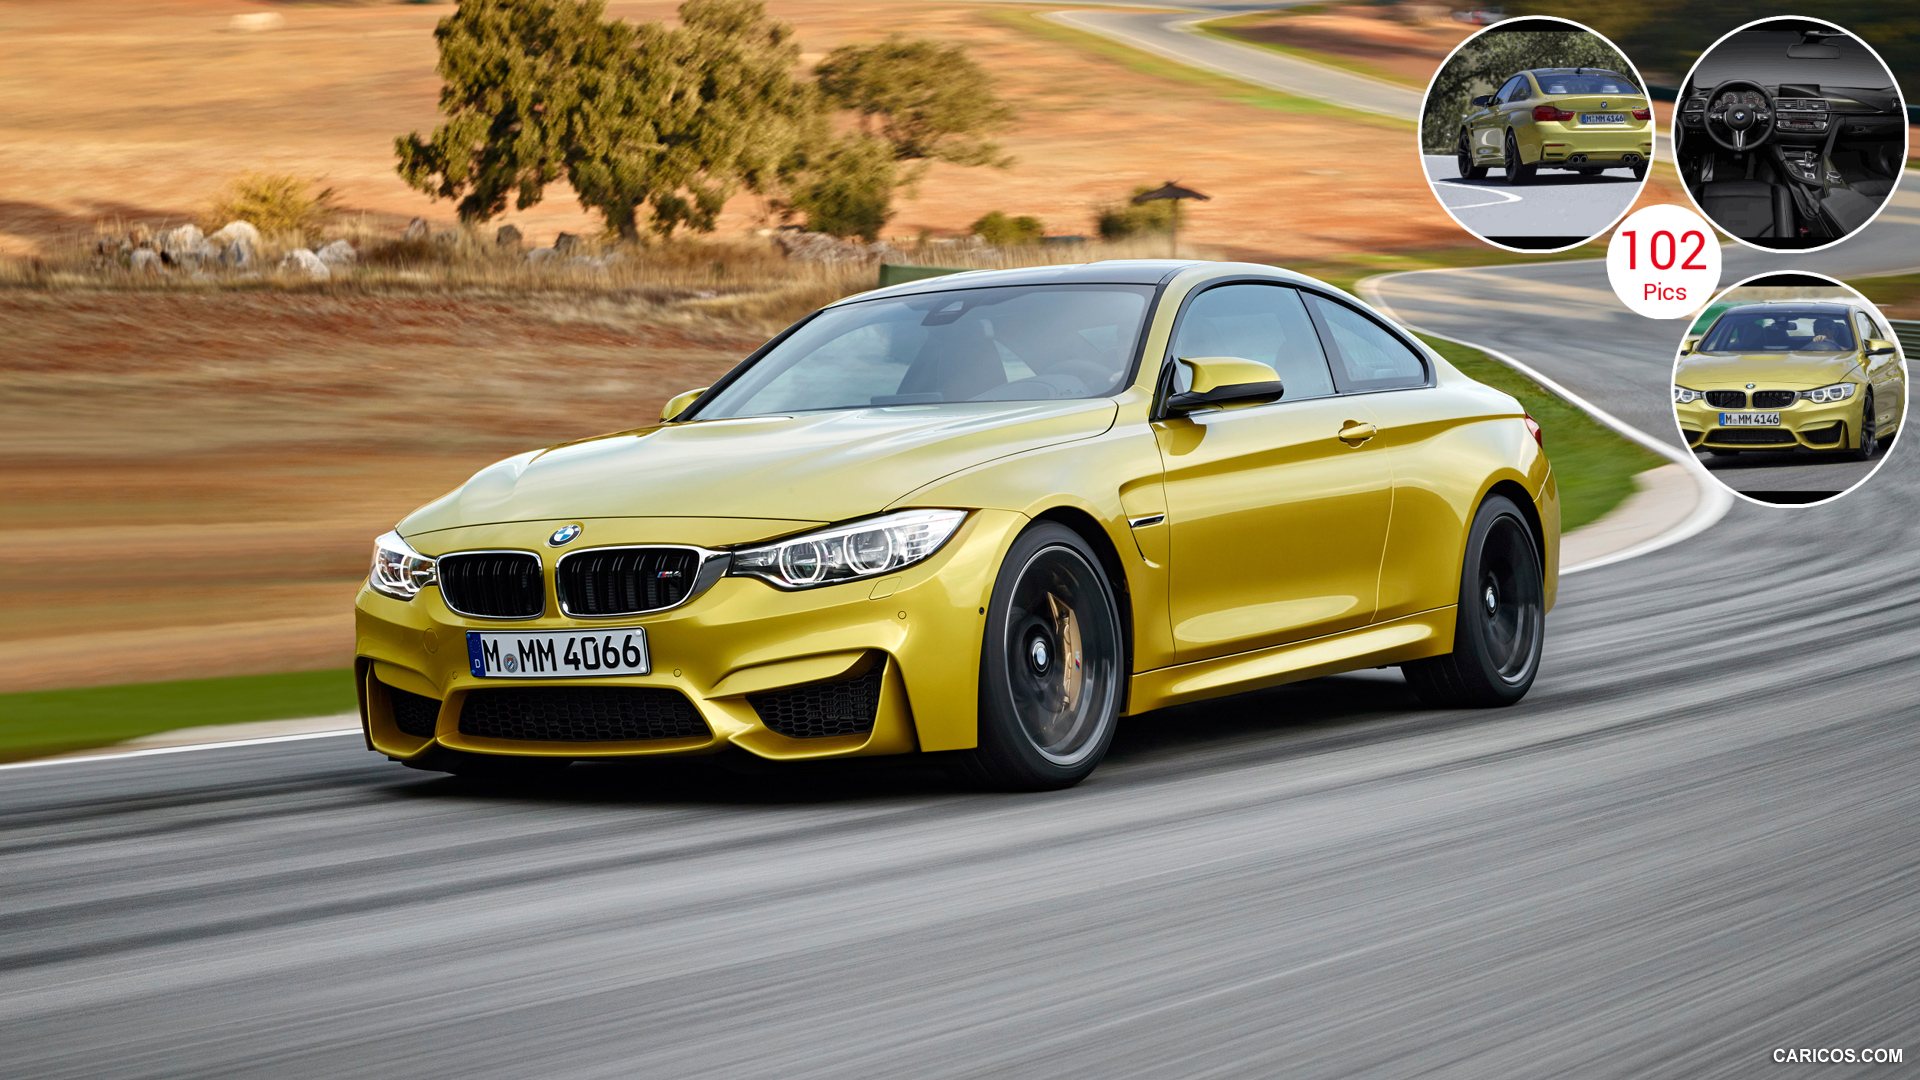 Amazing BMW M4 Coupe Pictures & Backgrounds